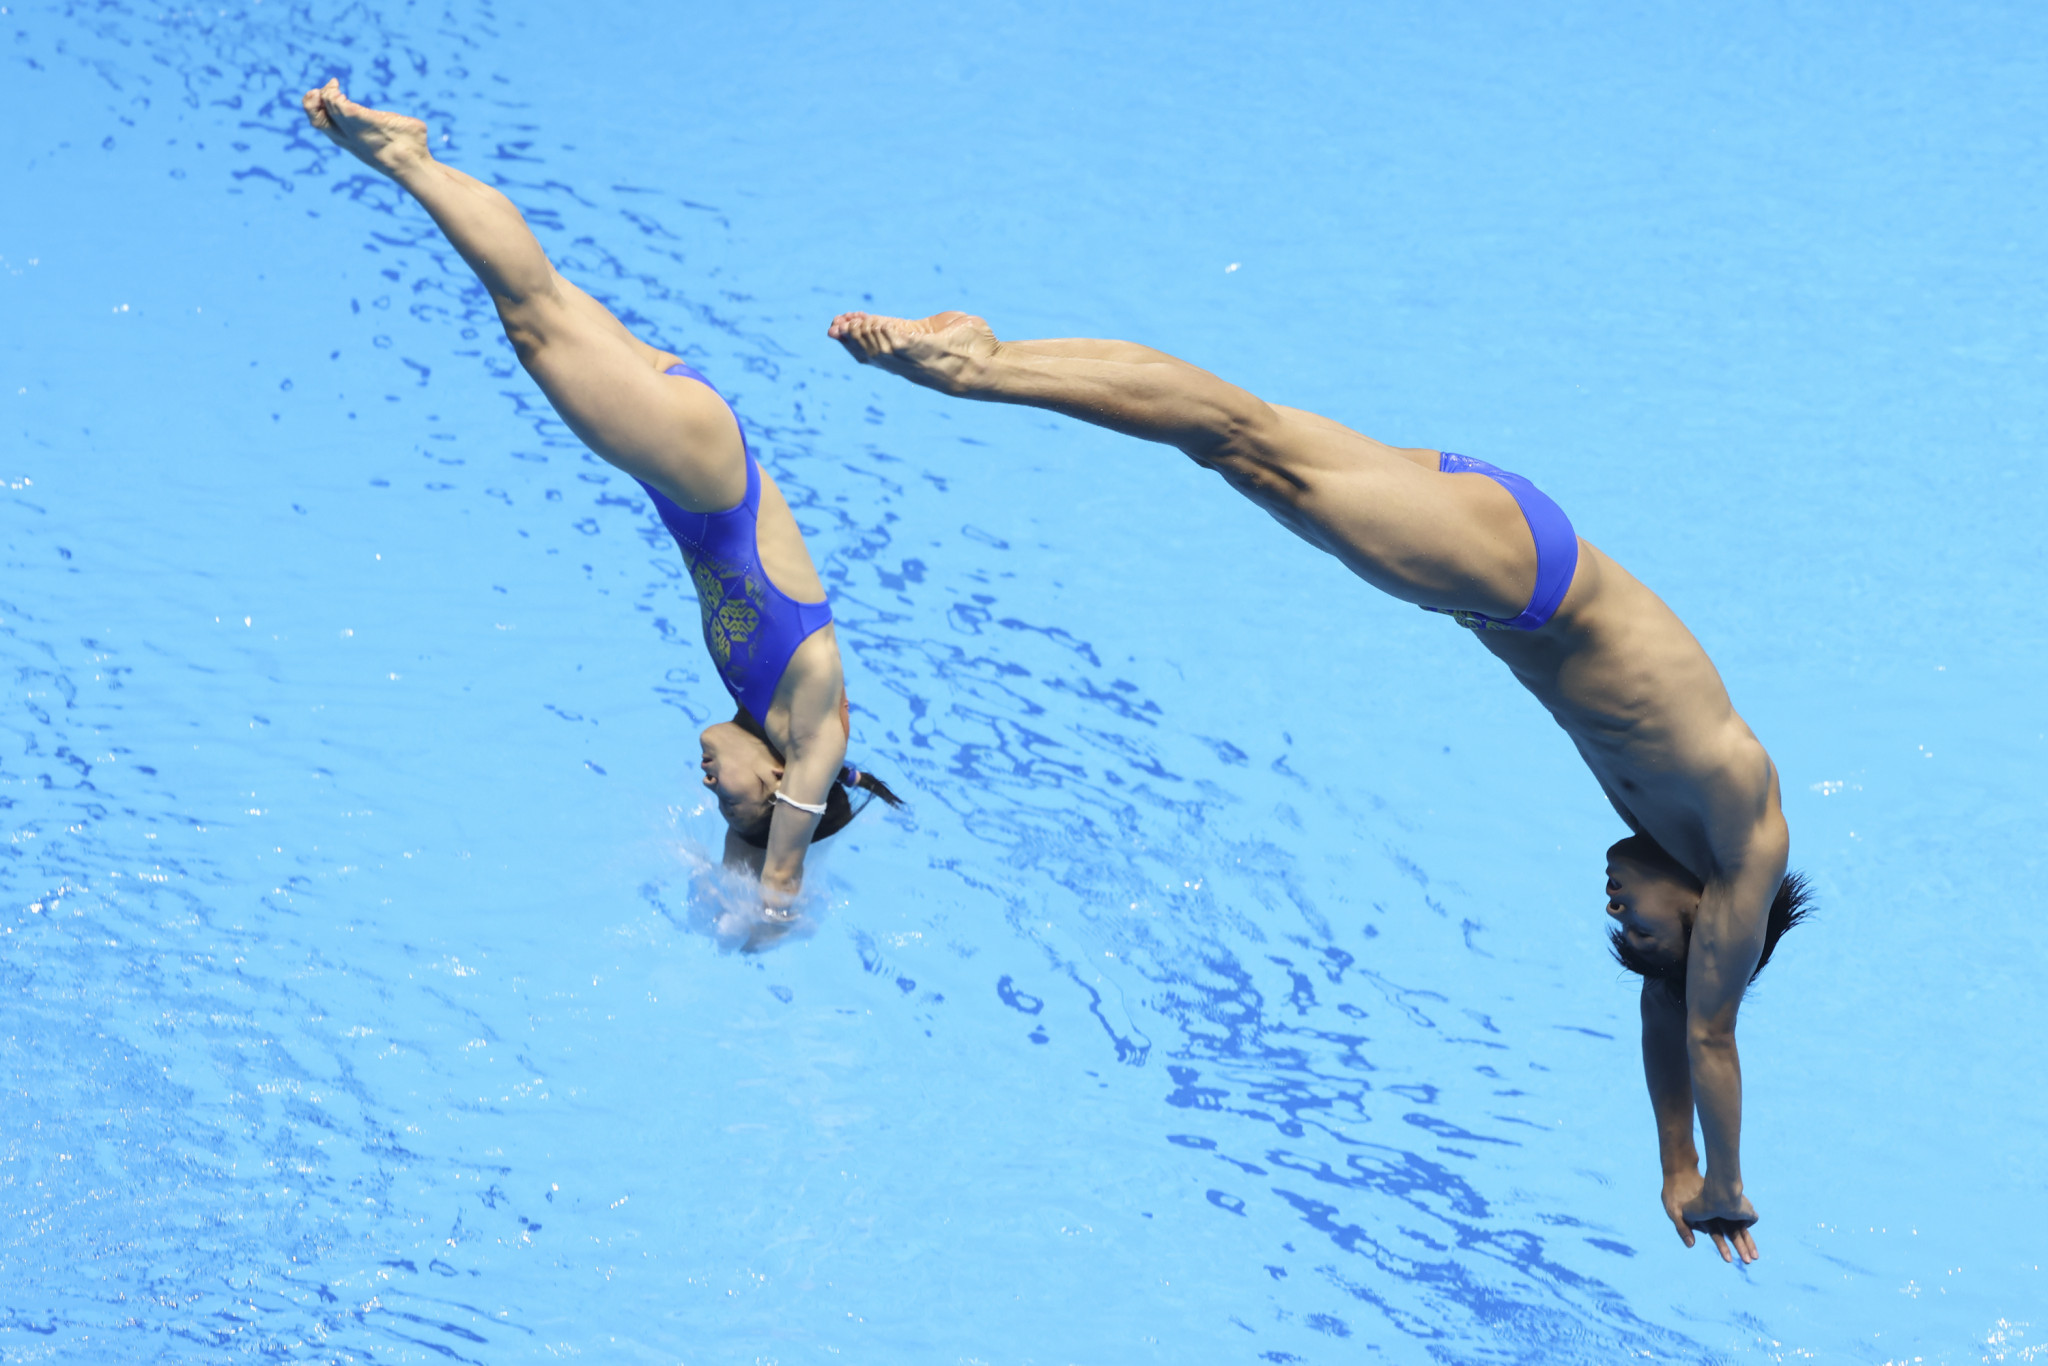 Wang, left, then clinched her second title of the day alongside Yang Ling in the mixed synchronised 3m springboard final ©Chengdu 2021